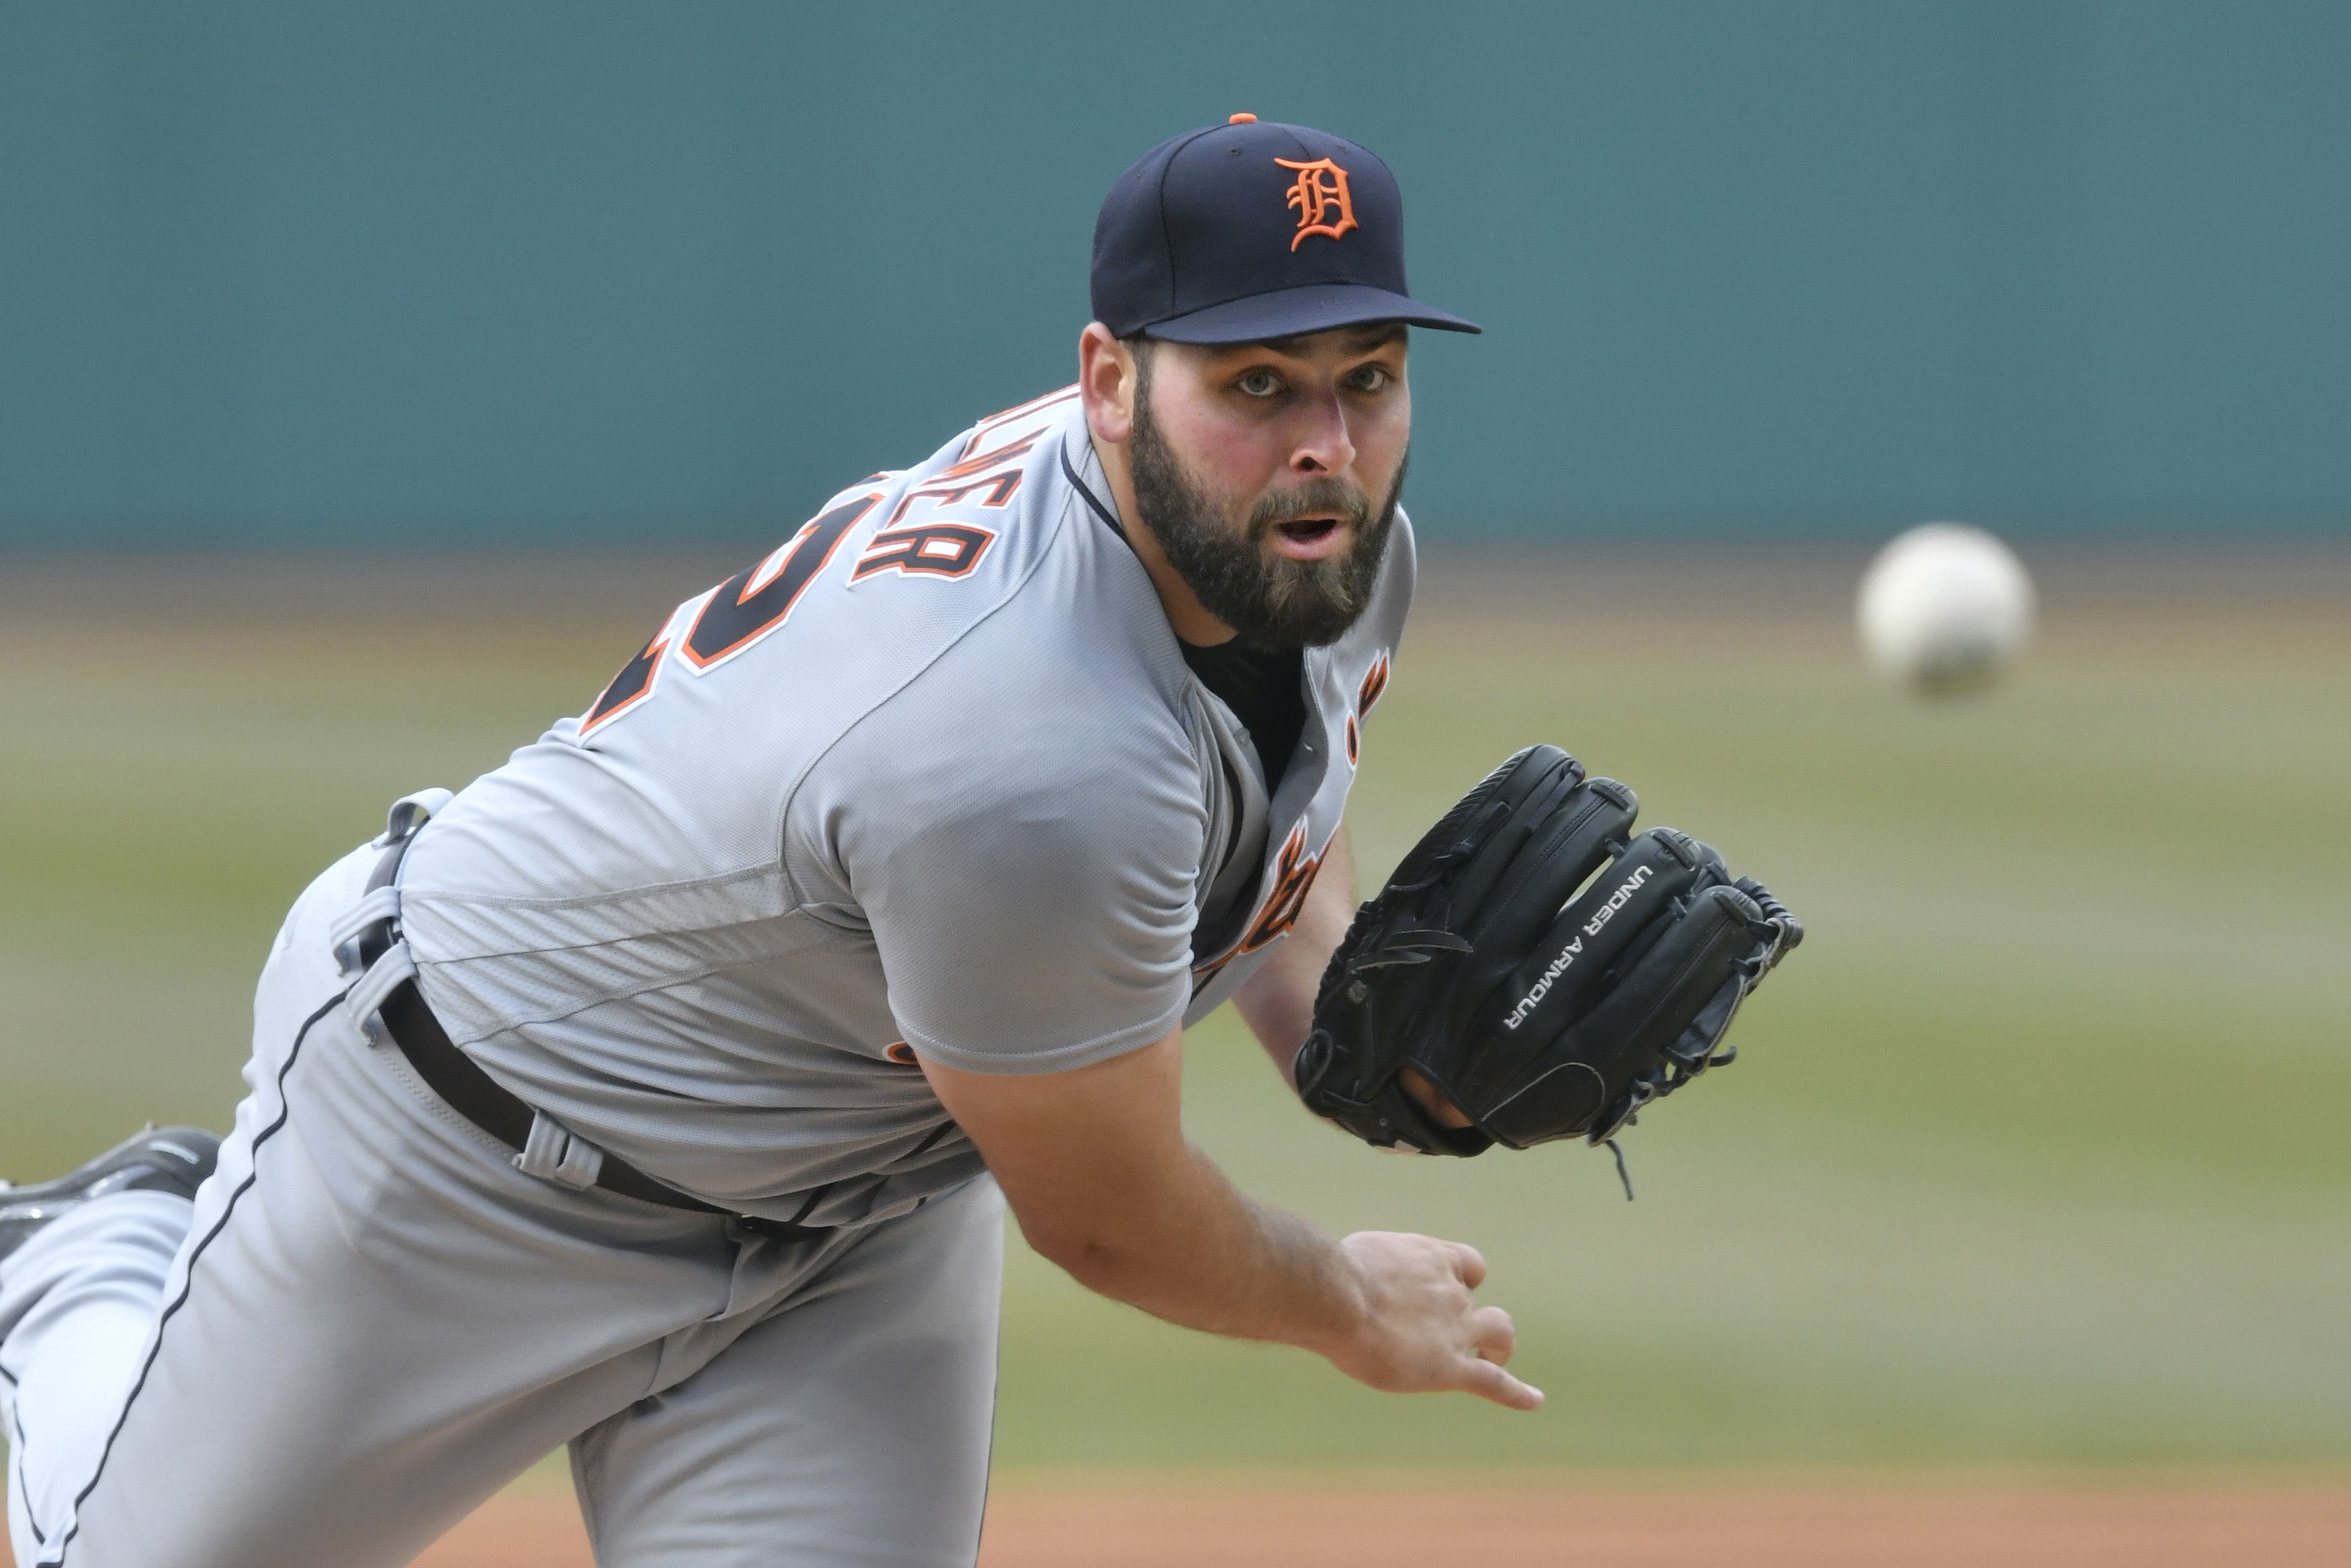 Apr 12, 2018; Cleveland, OH, USA; Detroit Tigers starting pitcher Michael Fulmer (32) delivers i the first inning against the Cleveland Indians at Progressive Field. Mandatory Credit: David Richard-USA TODAY Sports